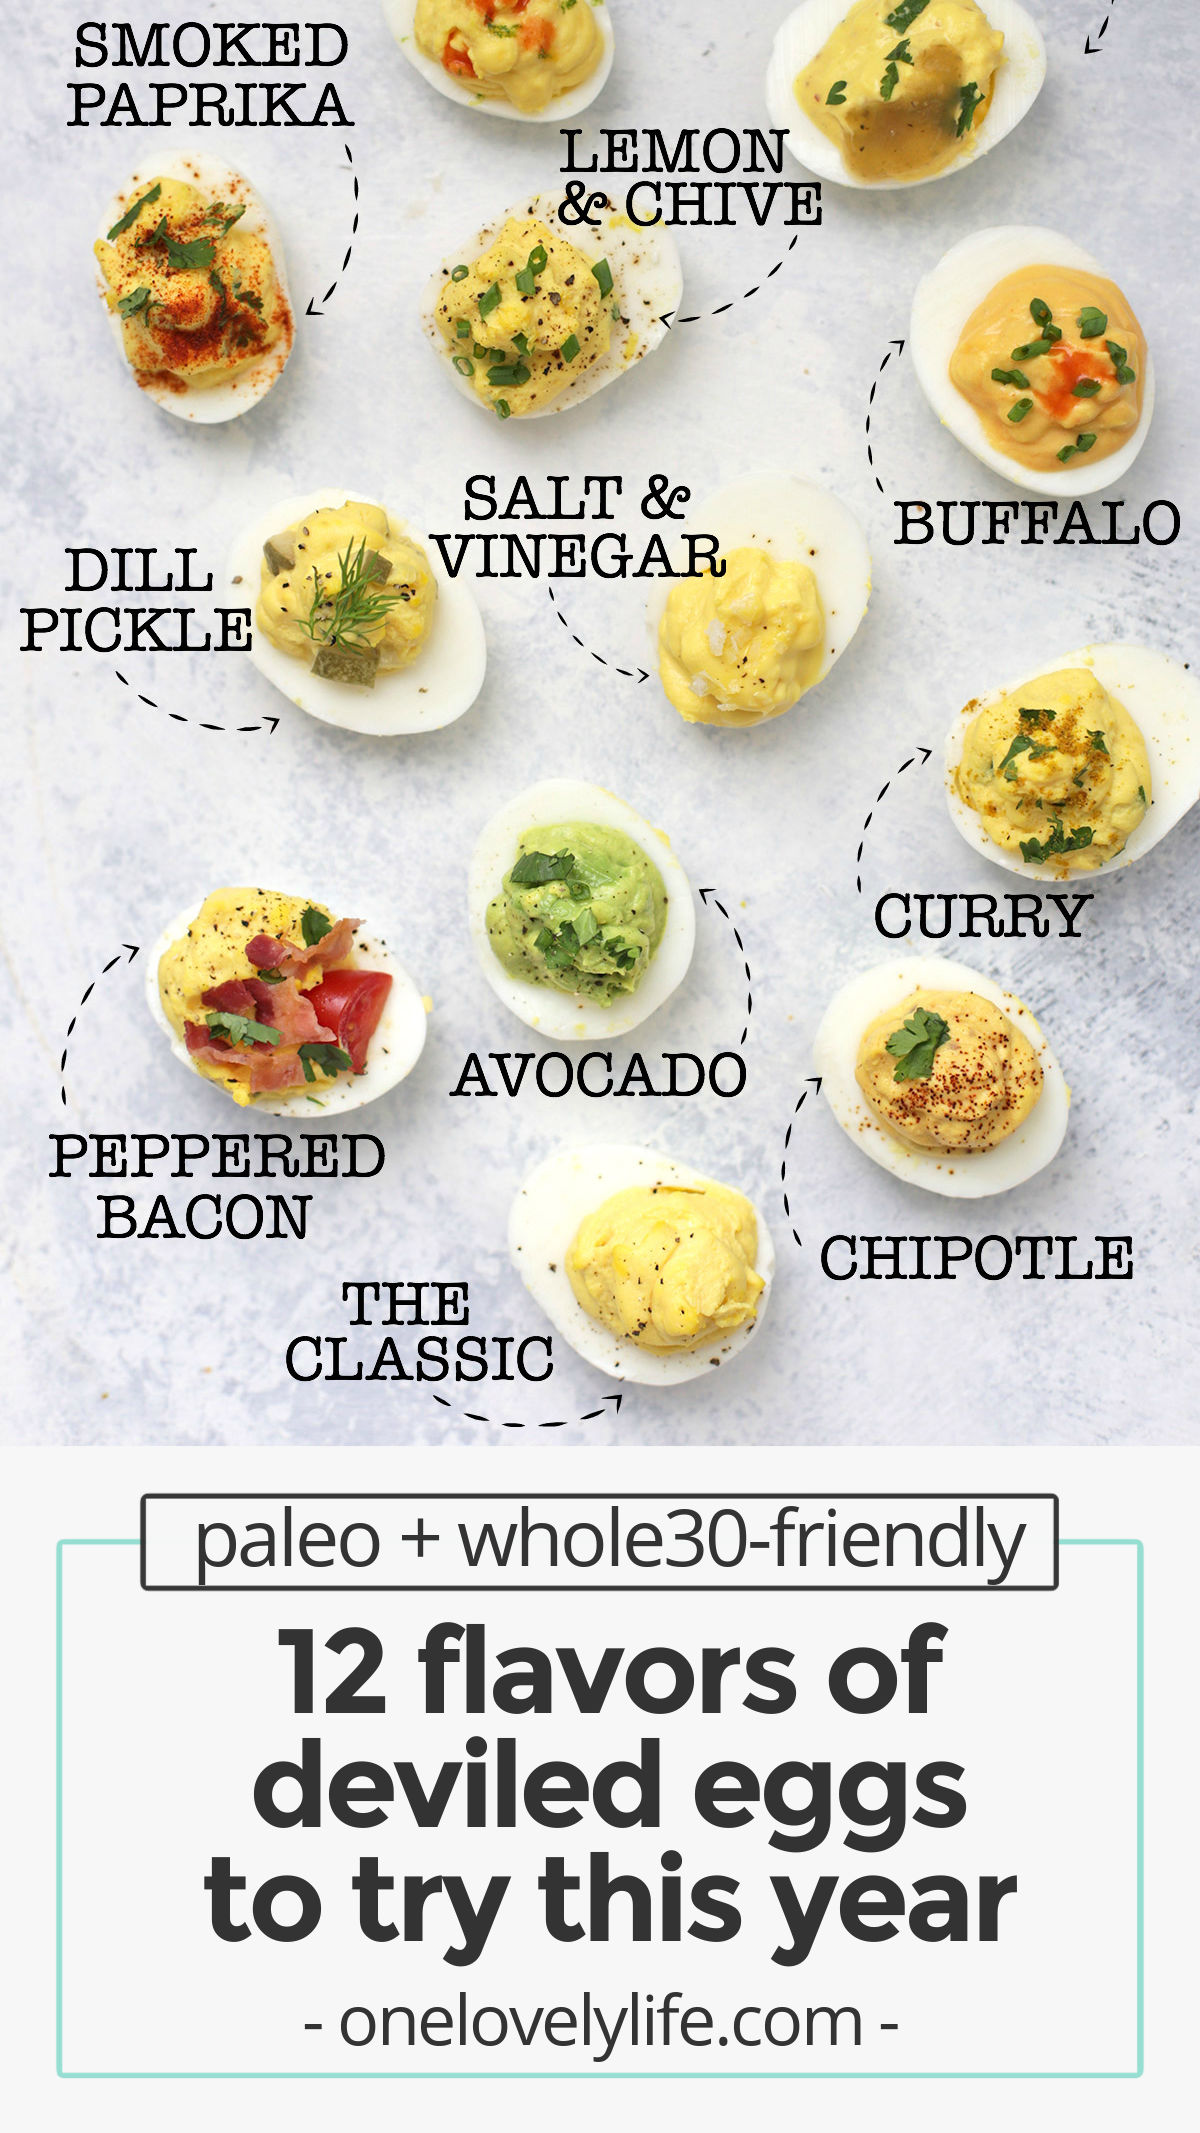 How to Make Perfect Deviled Eggs - My FAVORITE method for deviled eggs plus TWELVE delicious flavor combinations! All are paleo approved, gluten free, and absolutely delicious. // Paleo deviled eggs // the best deviled eggs recipe // deviled eggs no mayo // classic deviled eggs // perfect deviled eggs // 12 flavors of deviled eggs // whole30 deviled eggs // healthy deviled eggs //